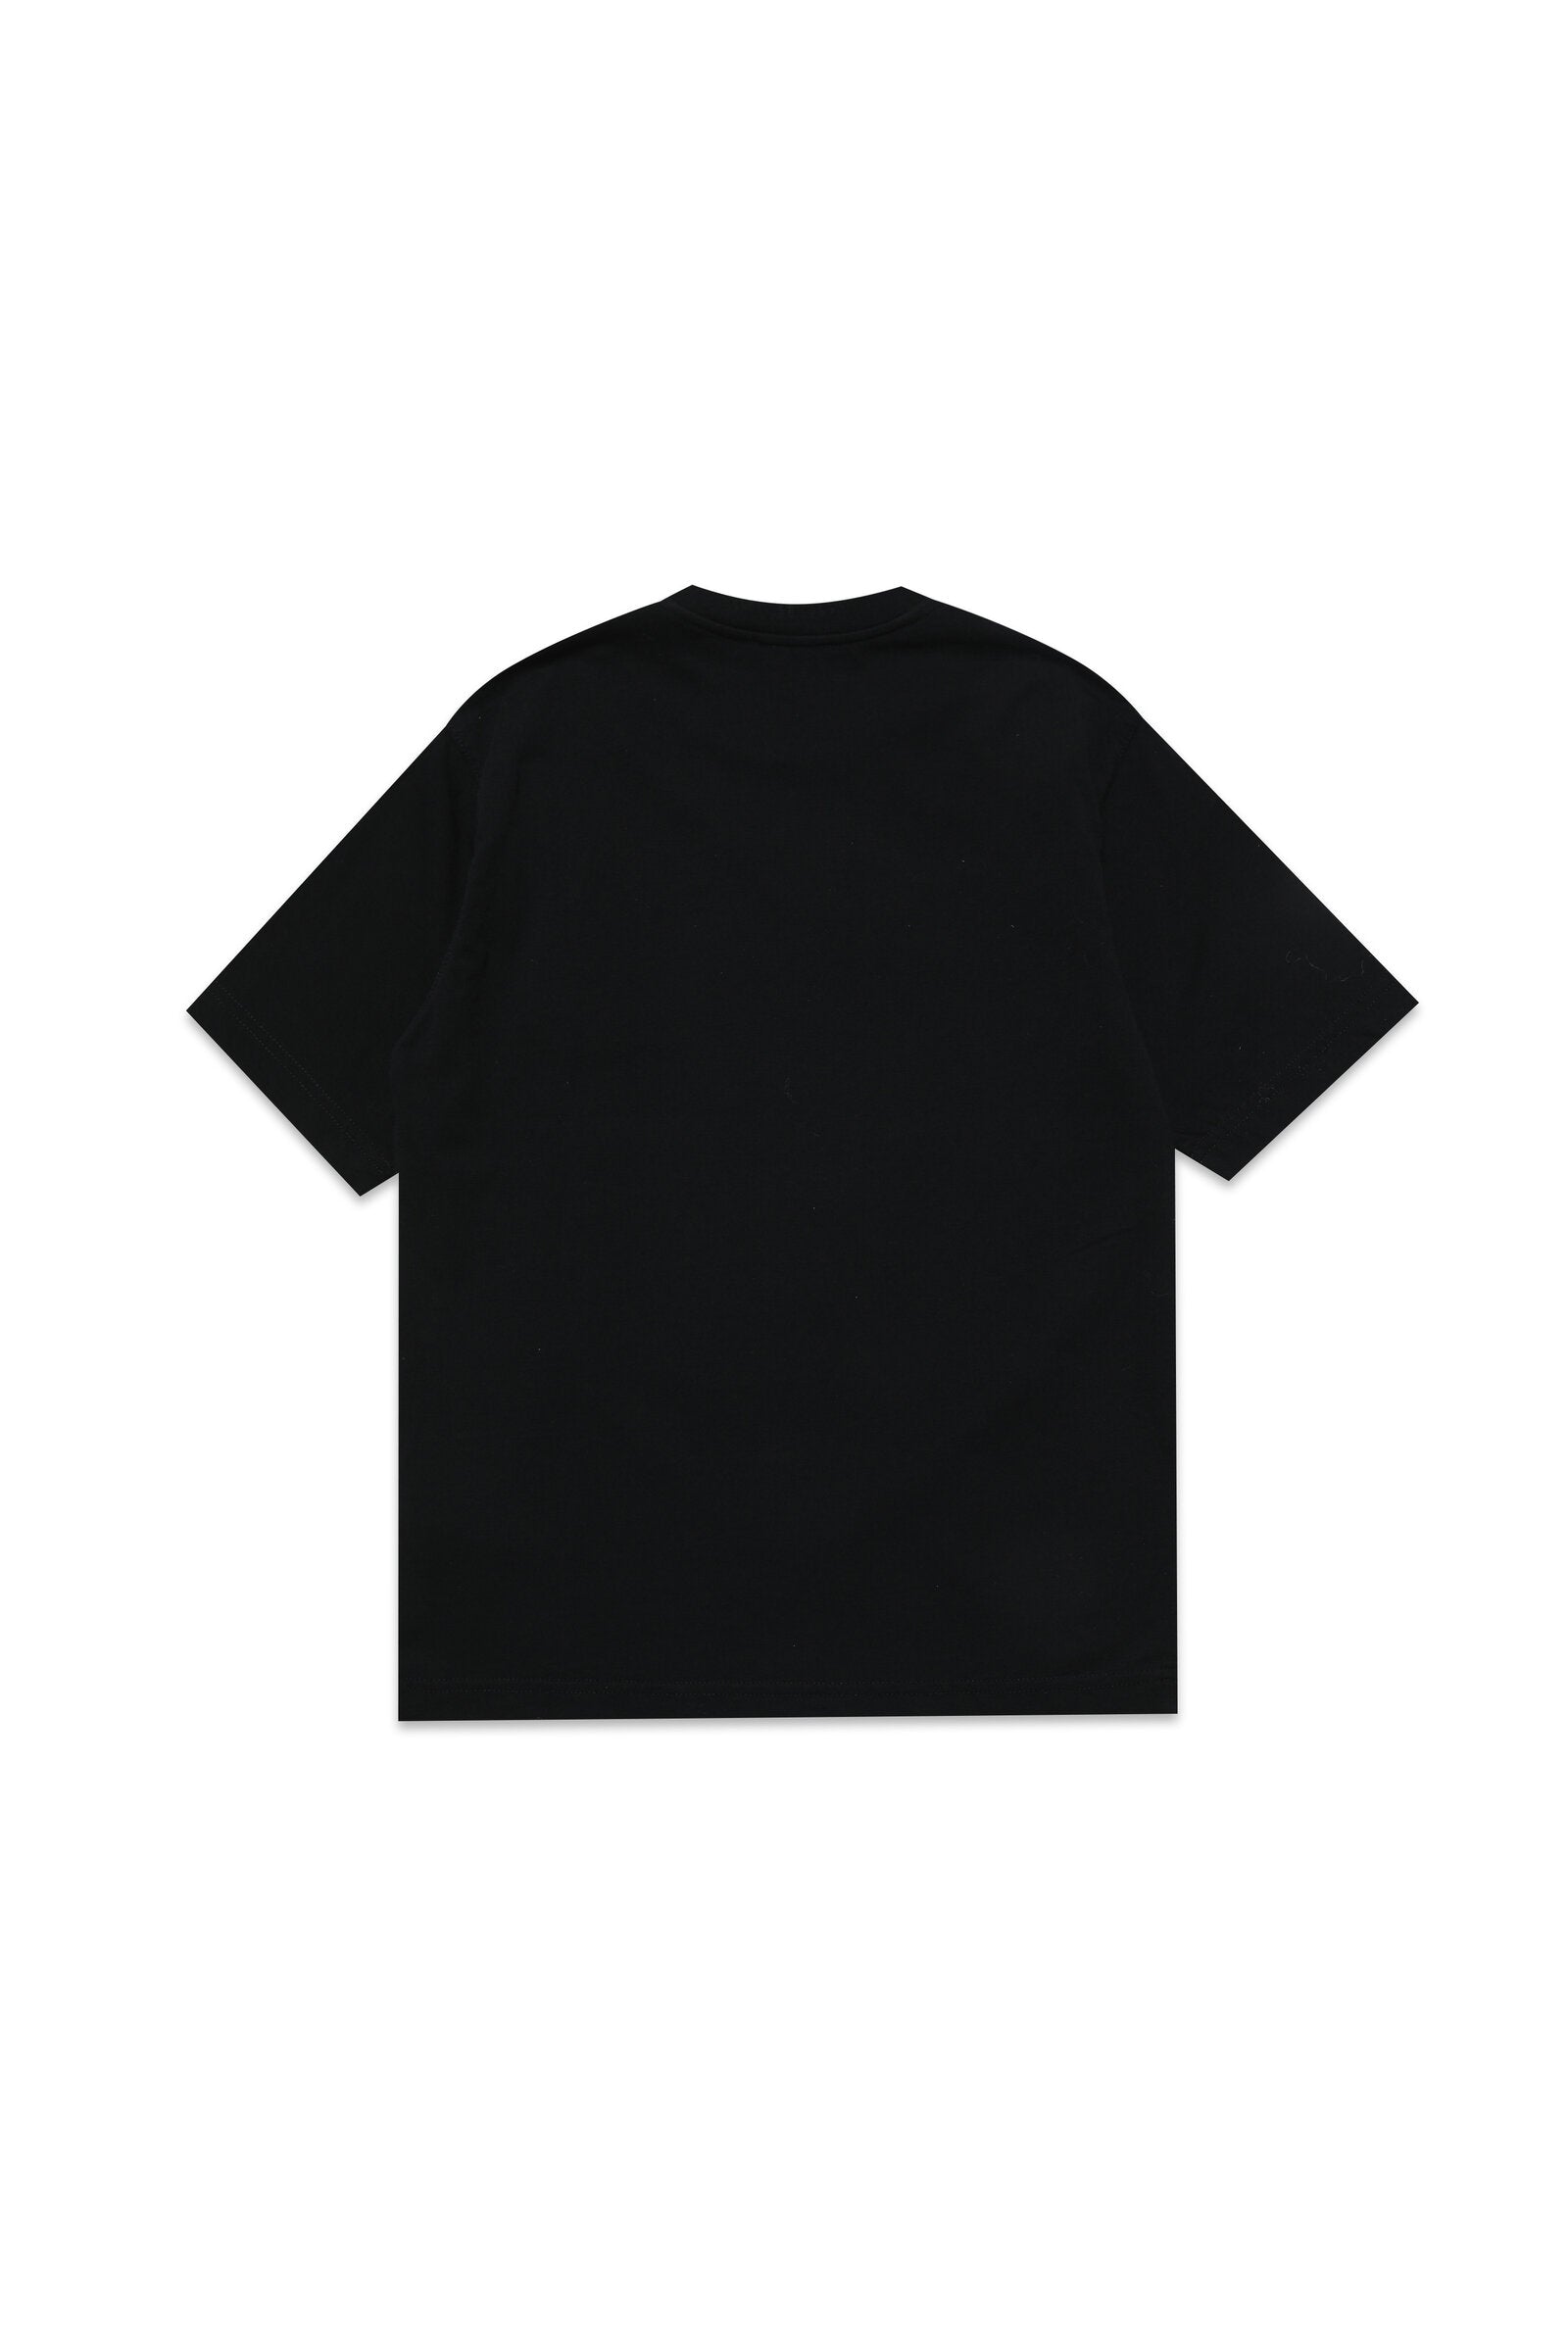 Crew-neck jersey T-shirt with overlapping printed fabrics